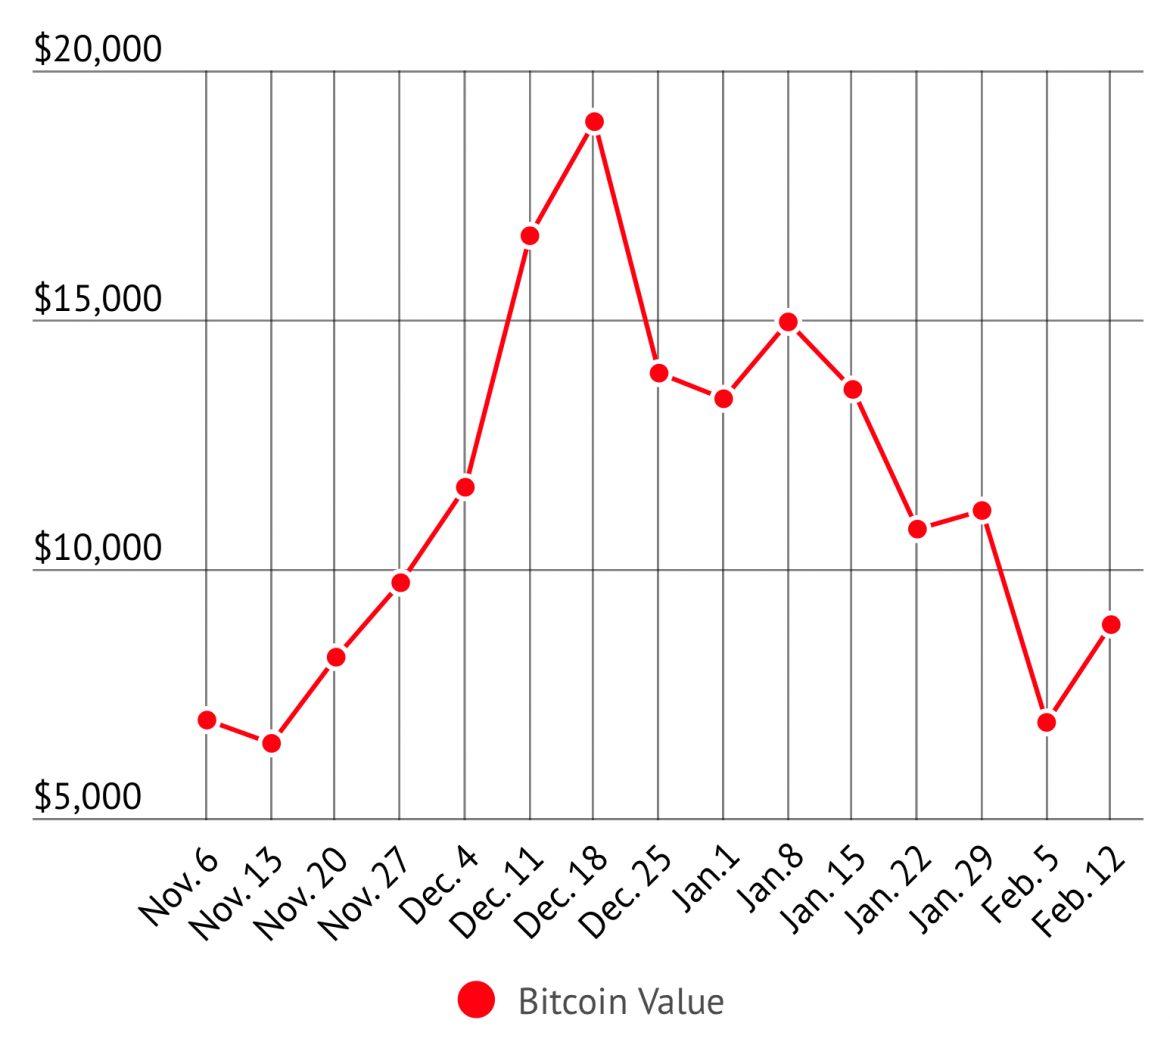 Bitcoin value takes a rollercoaster ride this past three months. Photo credit: Diane Roxas